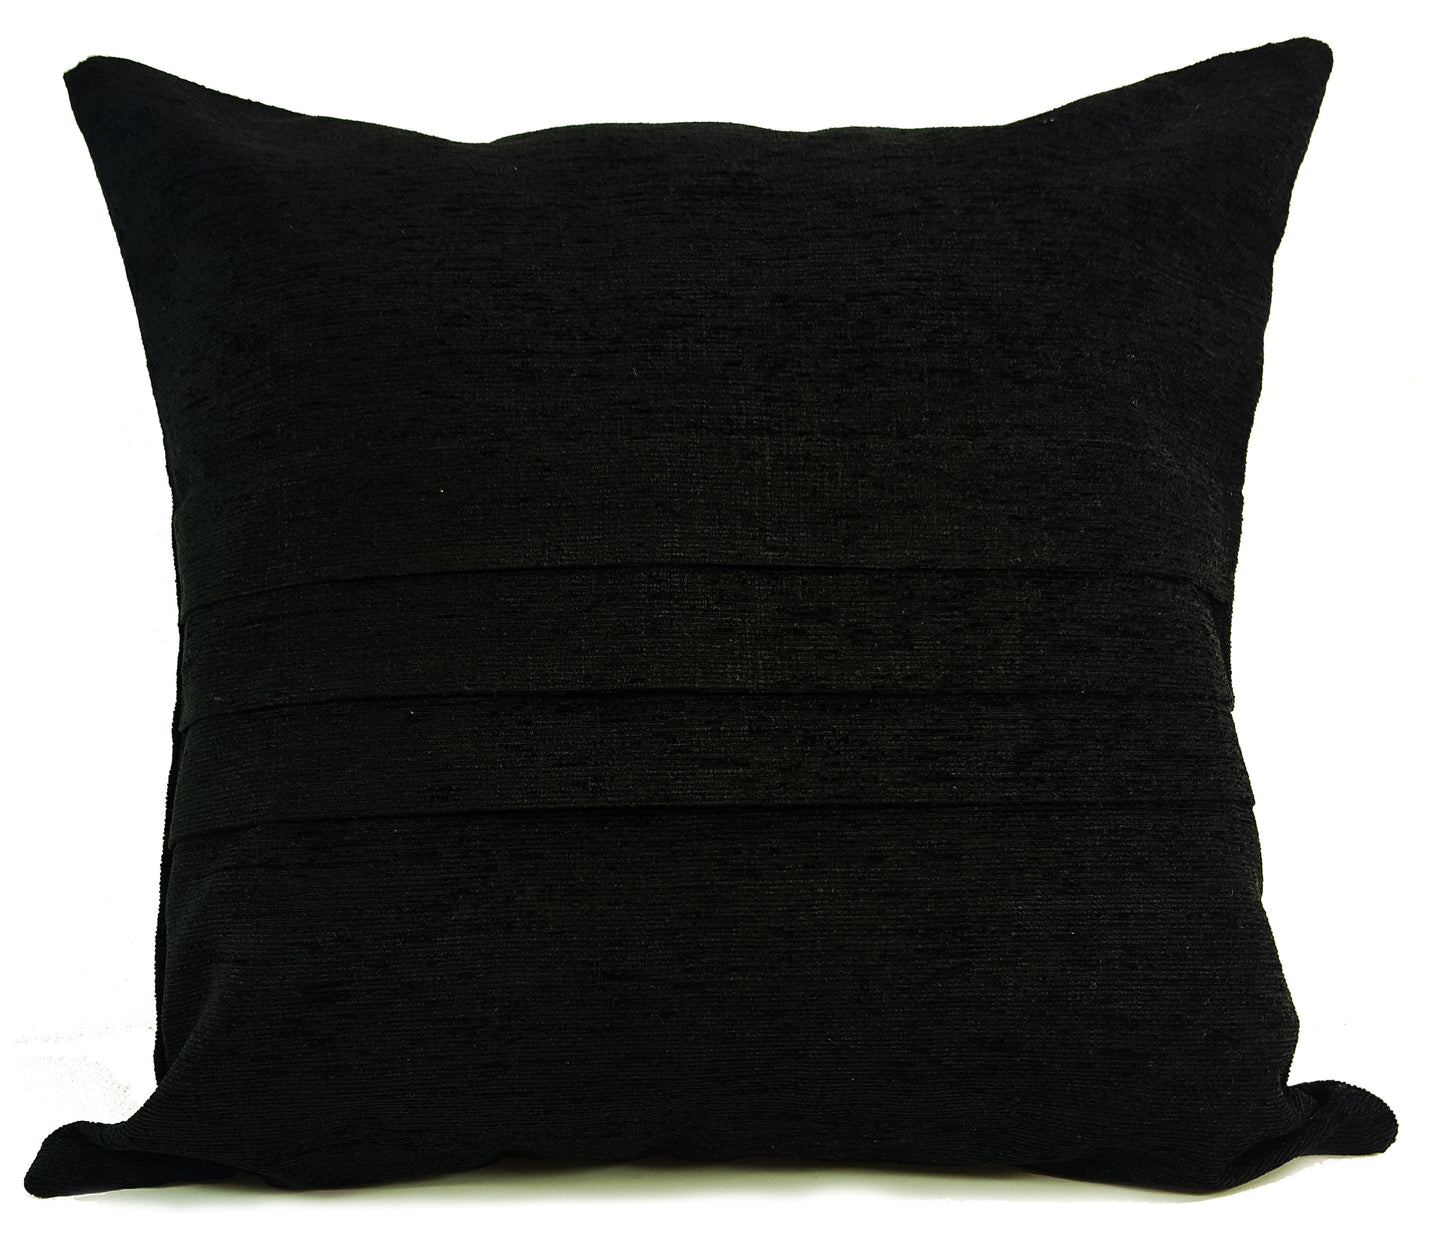 Chenille Cushion Large Cushion or Covers 17" ,21", 23"